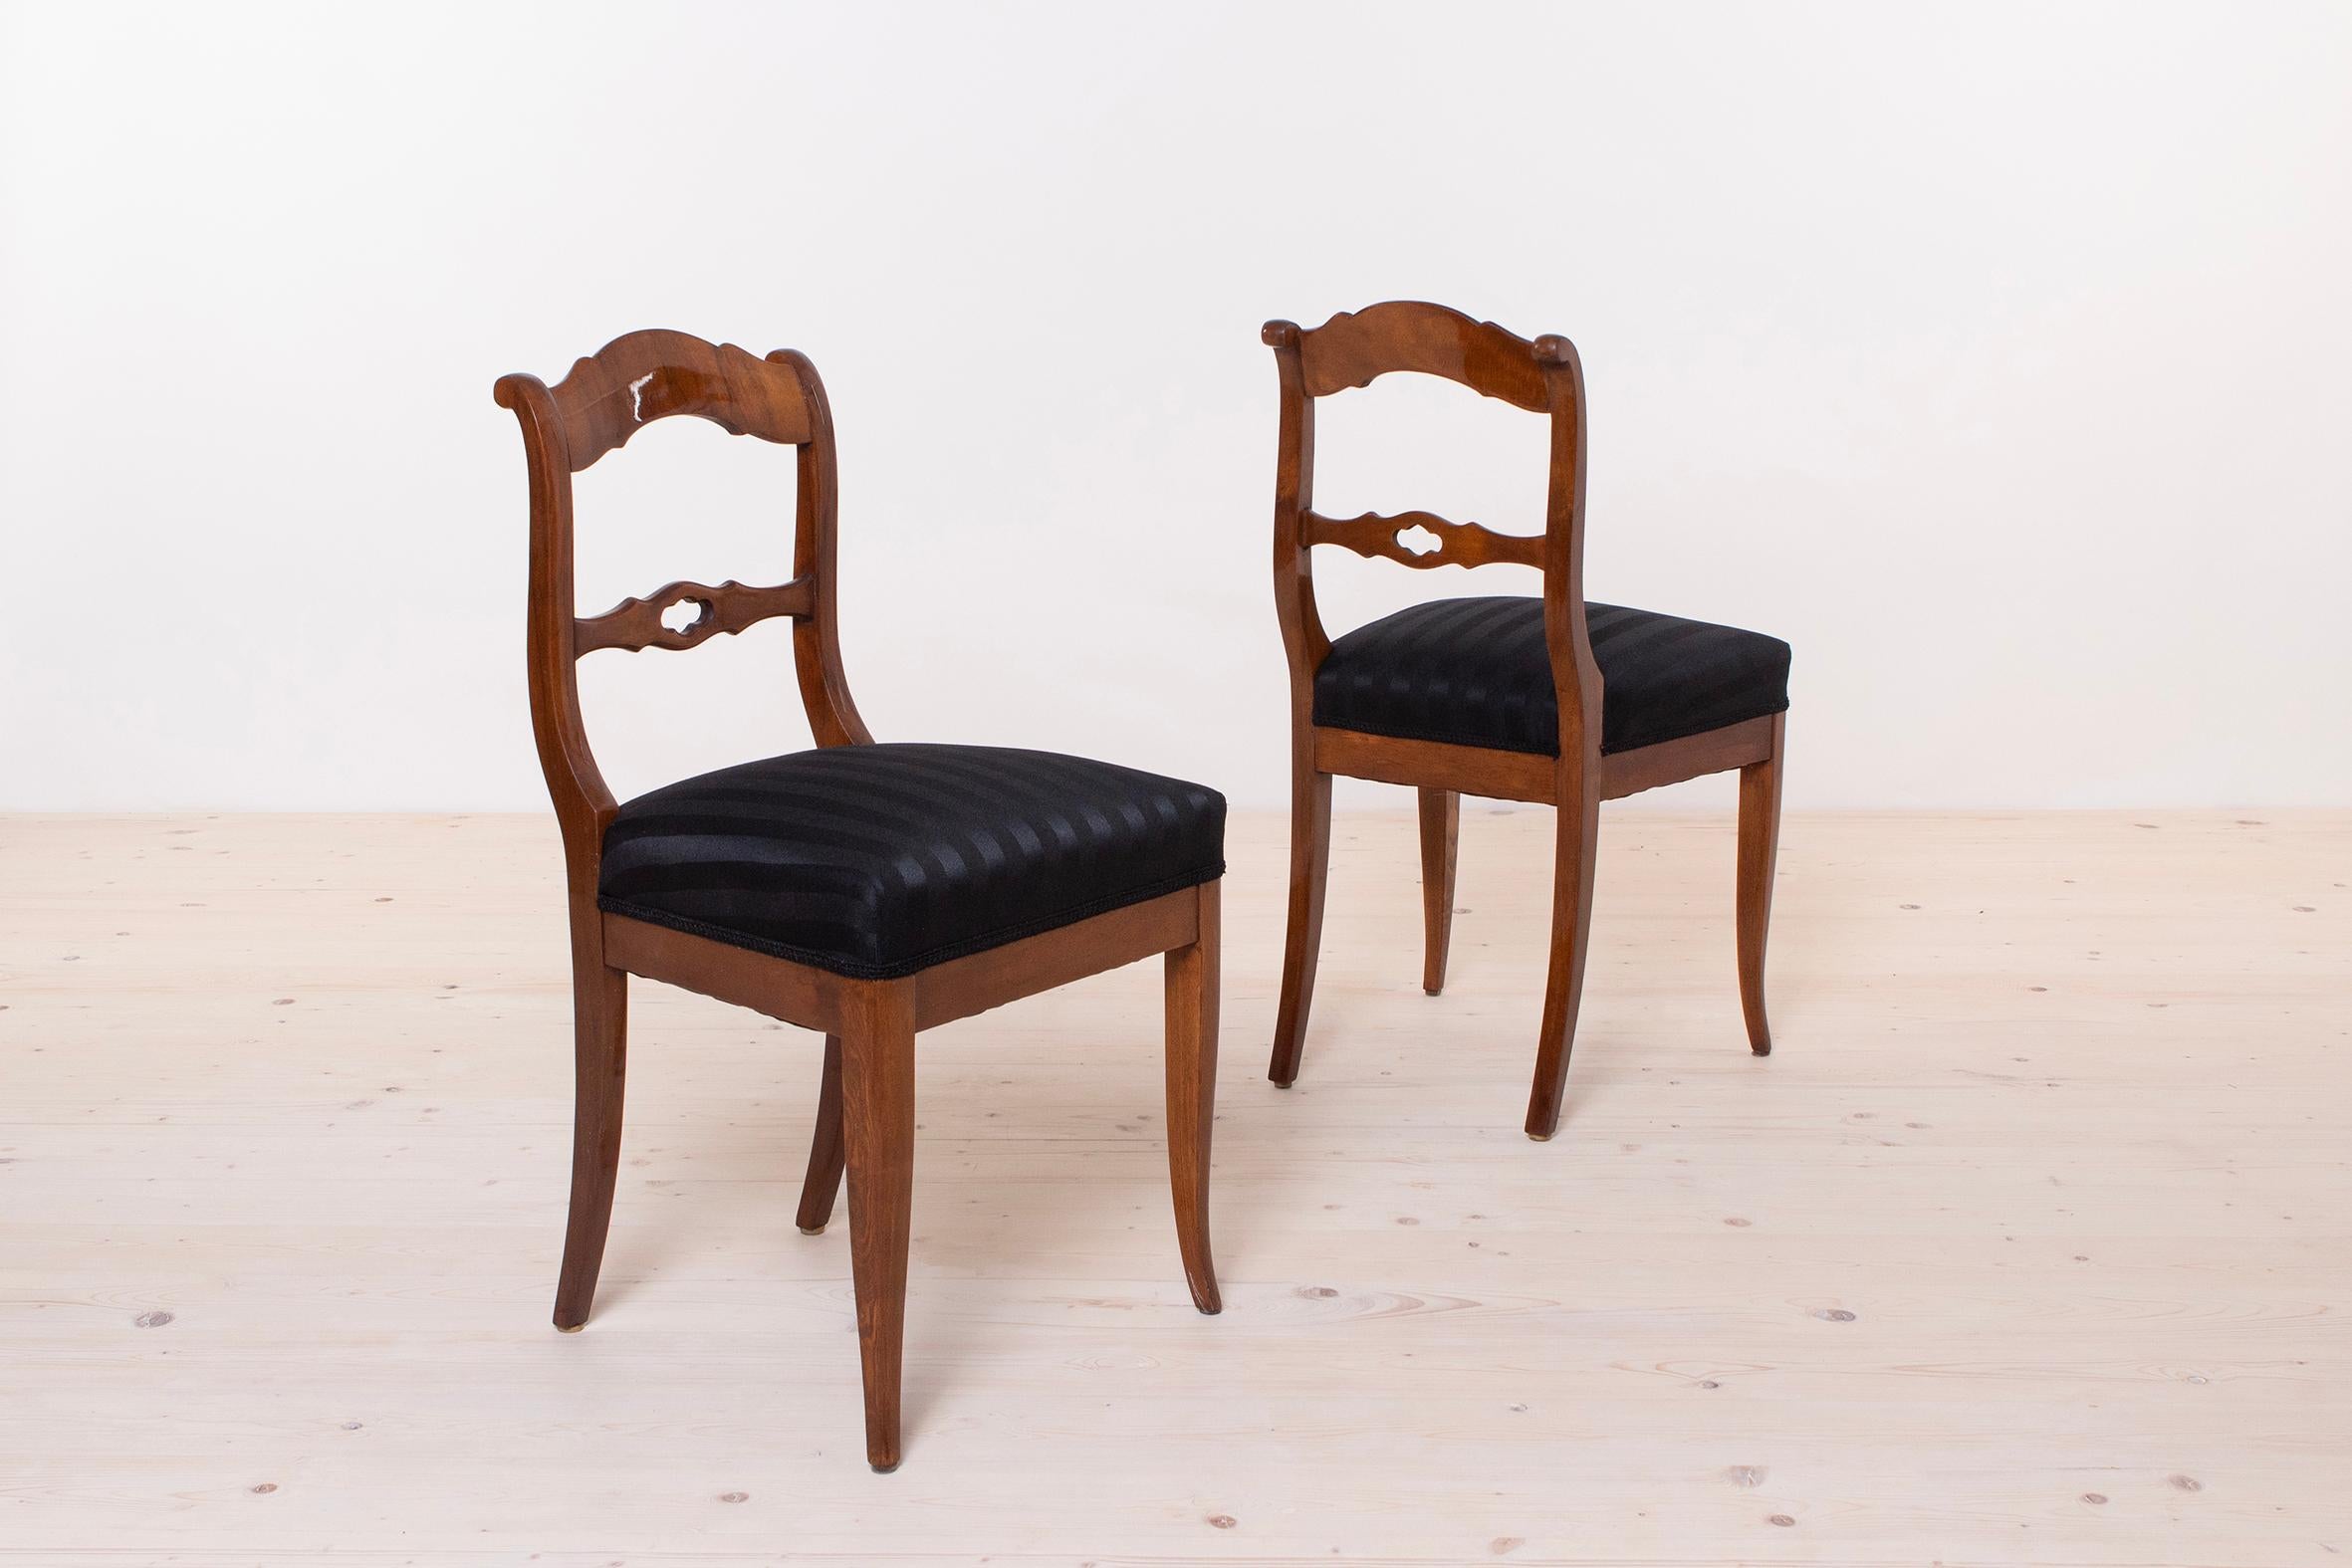 Set of 6 Biedermeier Elegant Black Chairs, Germany, 19th Century, Fully Restored In Good Condition For Sale In Wrocław, Poland